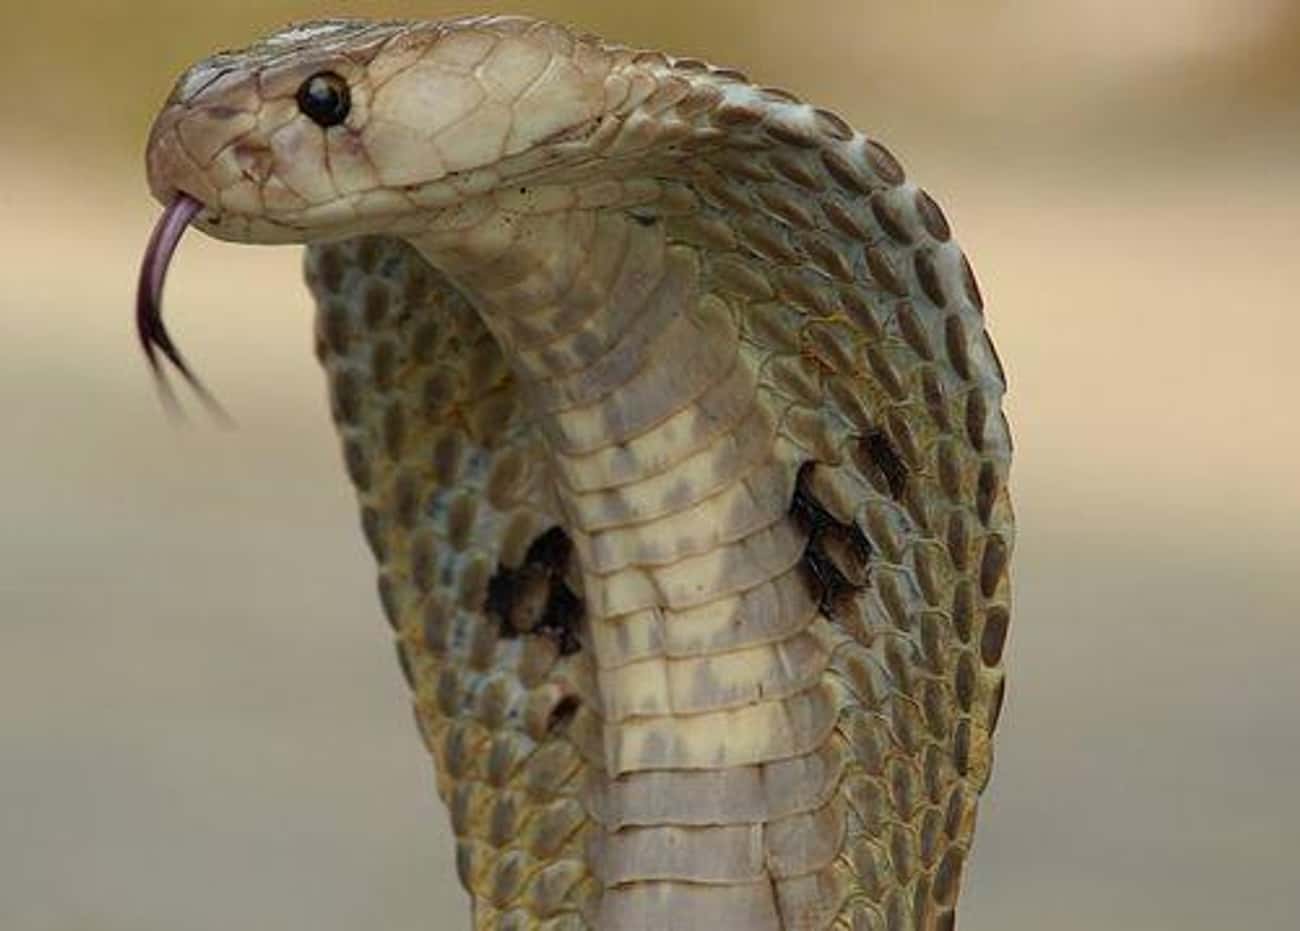 The Indian Cobra Will Shut Down The Body's Muscles, Including The Heart